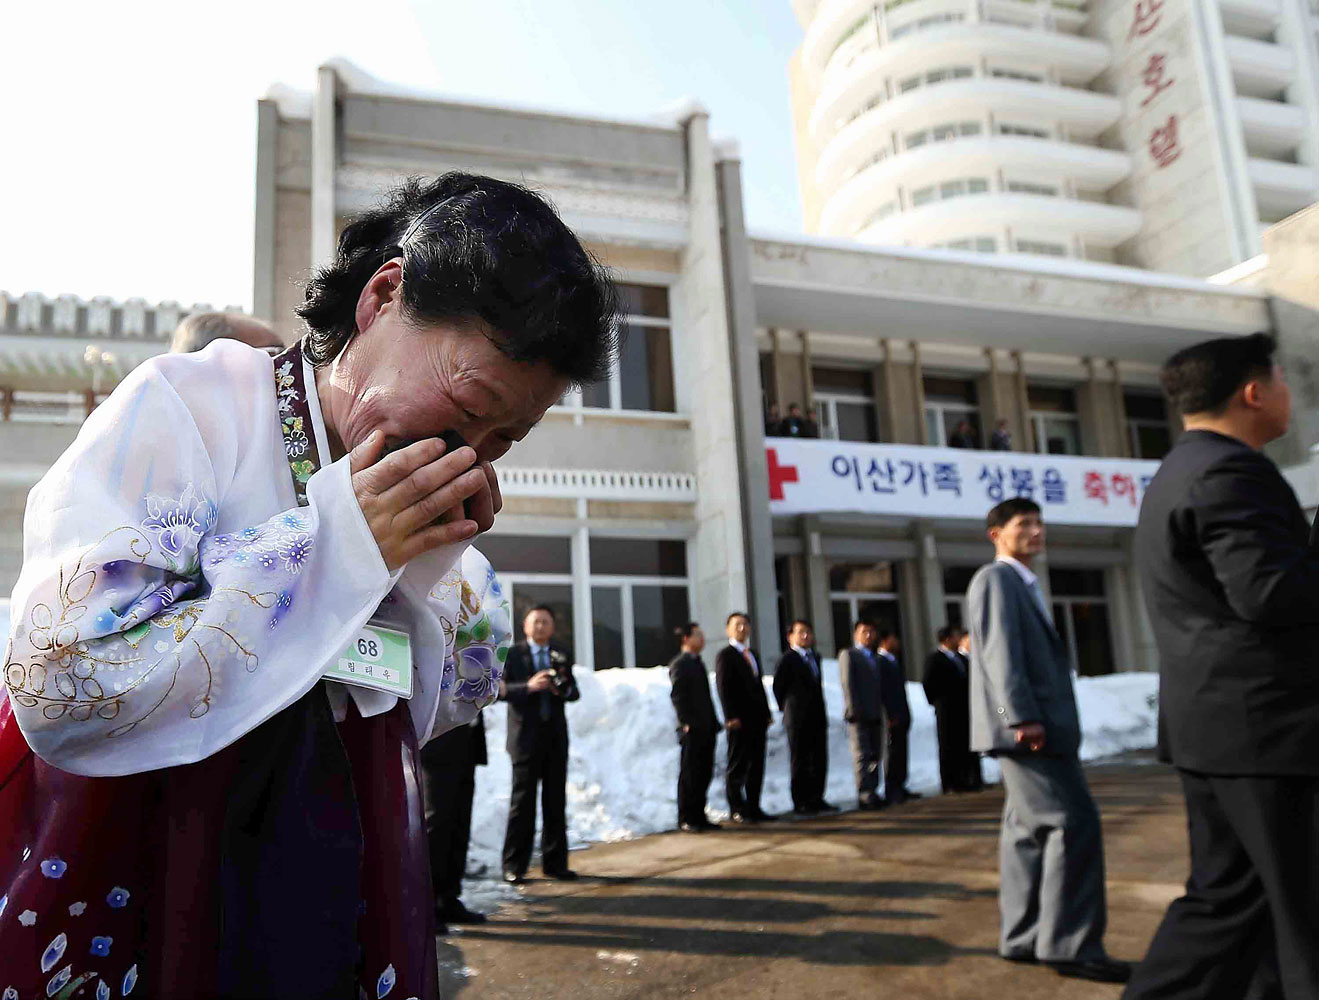 Lim Tae-Wook, a North Korean woman, sobs as she leaves her South Korean older brother after a separated family reunion meeting at Mount Kumgang resort, North Korea, Feb. 22, 2014.